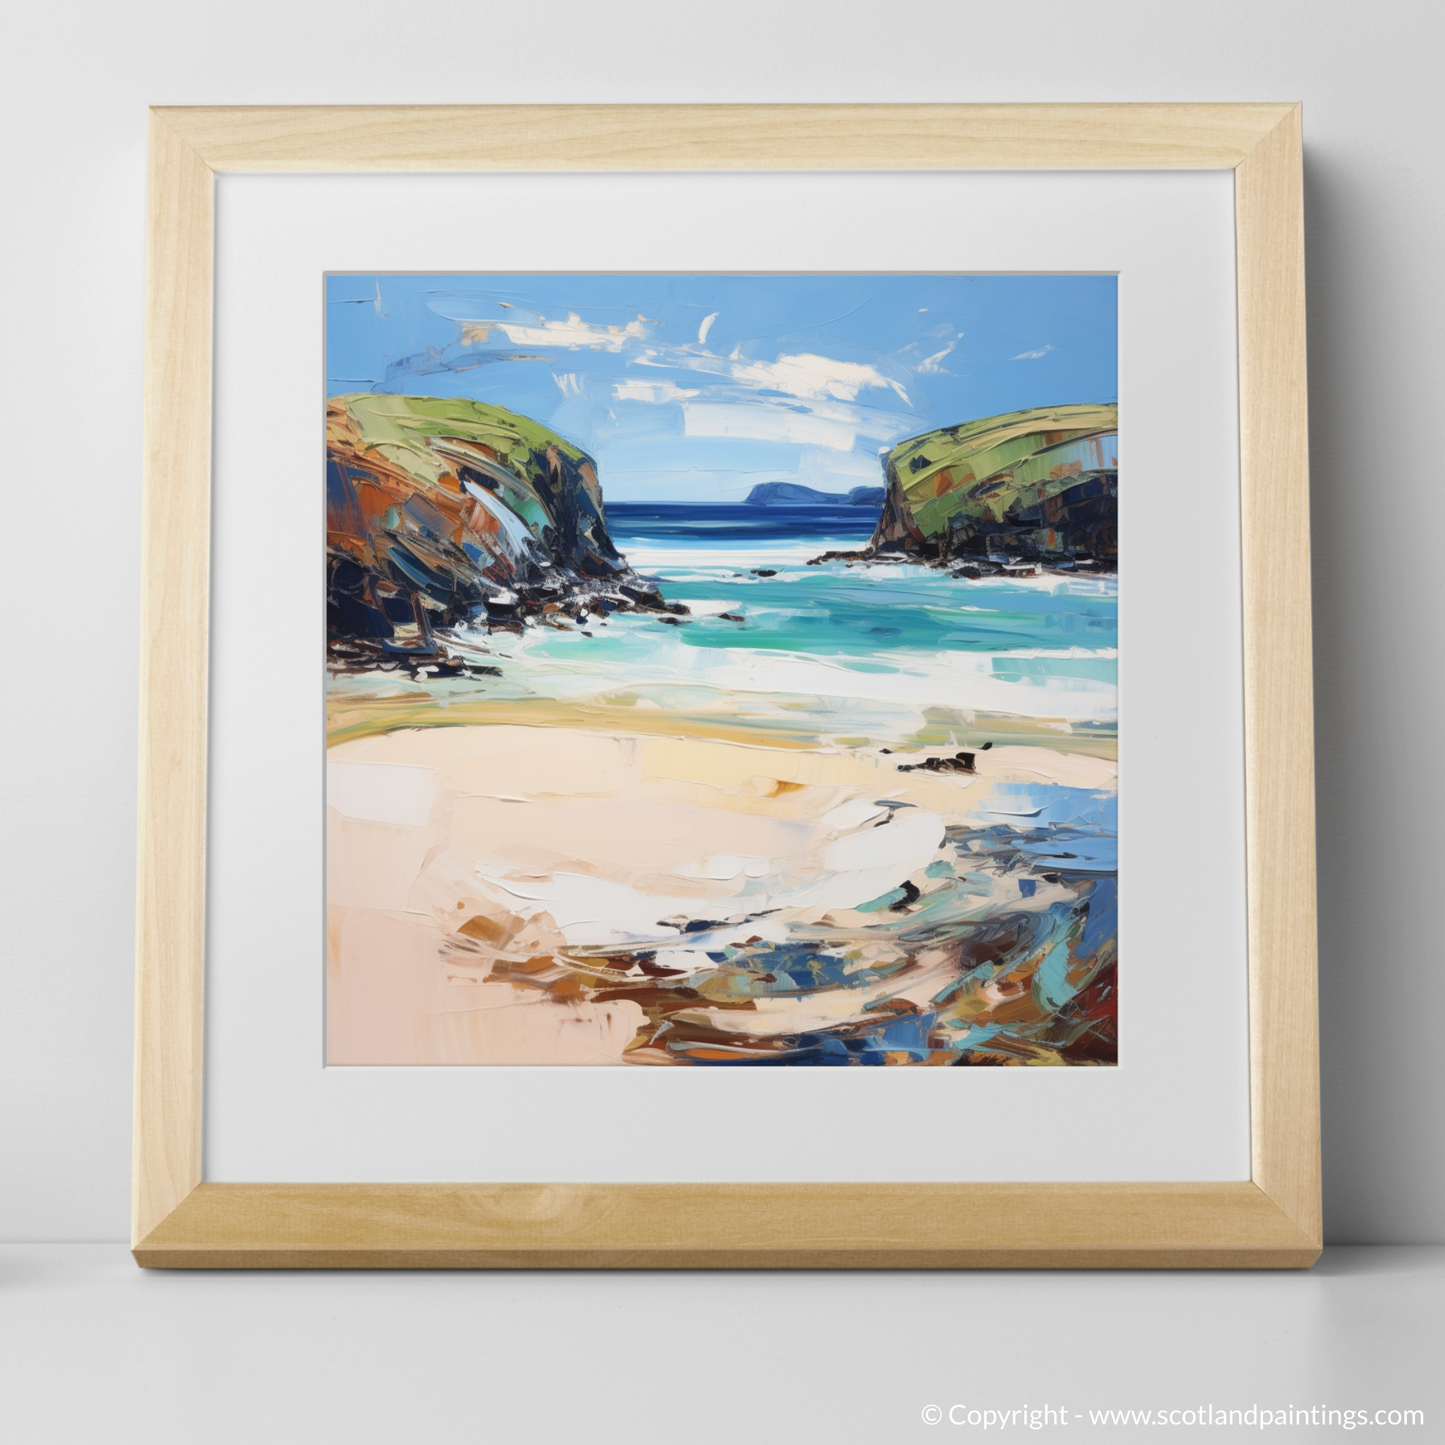 Art Print of Sandwood Bay, Sutherland with a natural frame